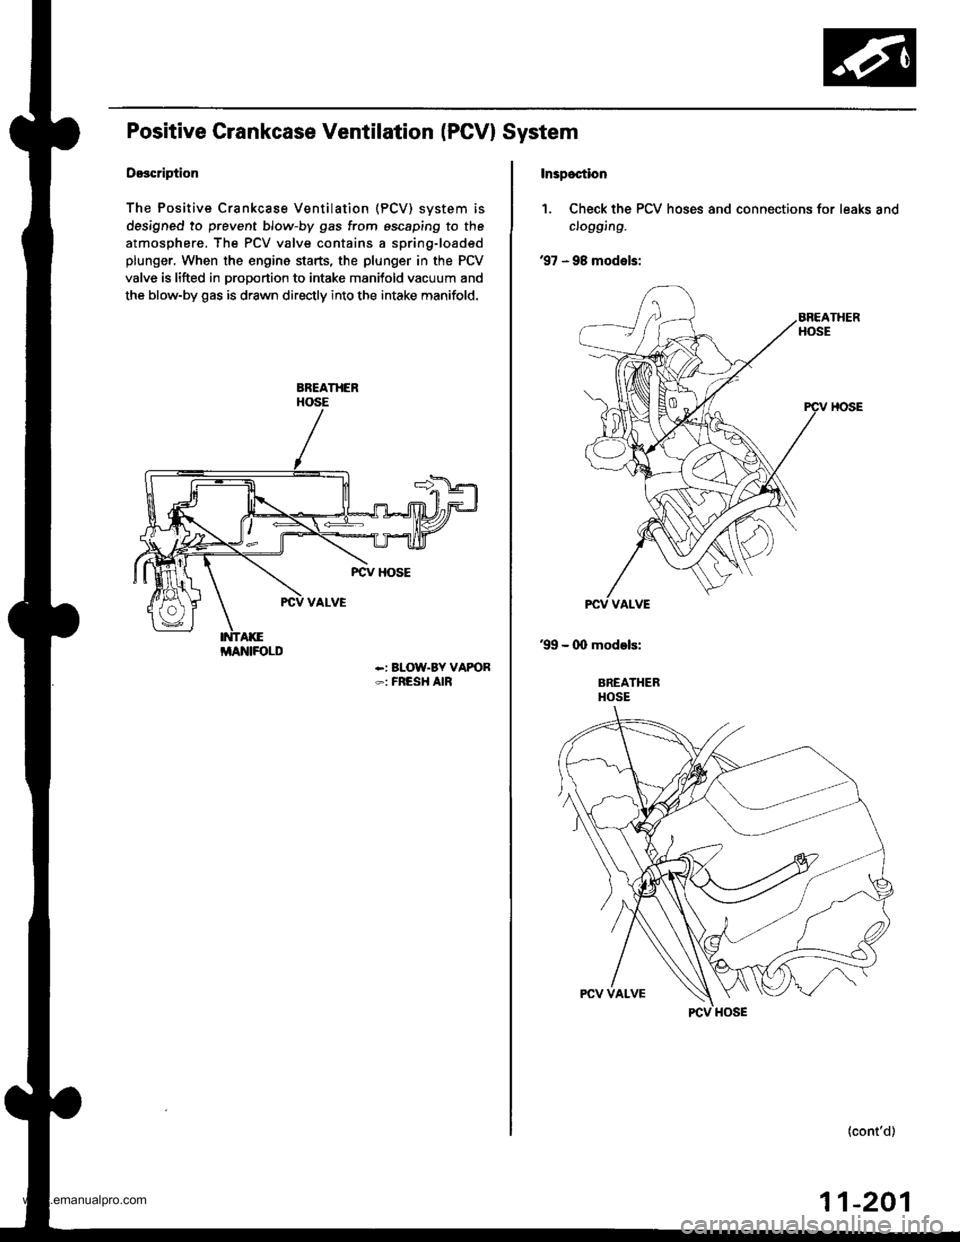 HONDA CR-V 1998 RD1-RD3 / 1.G Owners Guide 
Positive Grankcase Ventilation (PGVI System
Description
The Positive Crankcase Ventilation (PCV) svstem is
designed to prevent blow-by gas from escaping to the
atmosphere. The PCV valve contains a sp